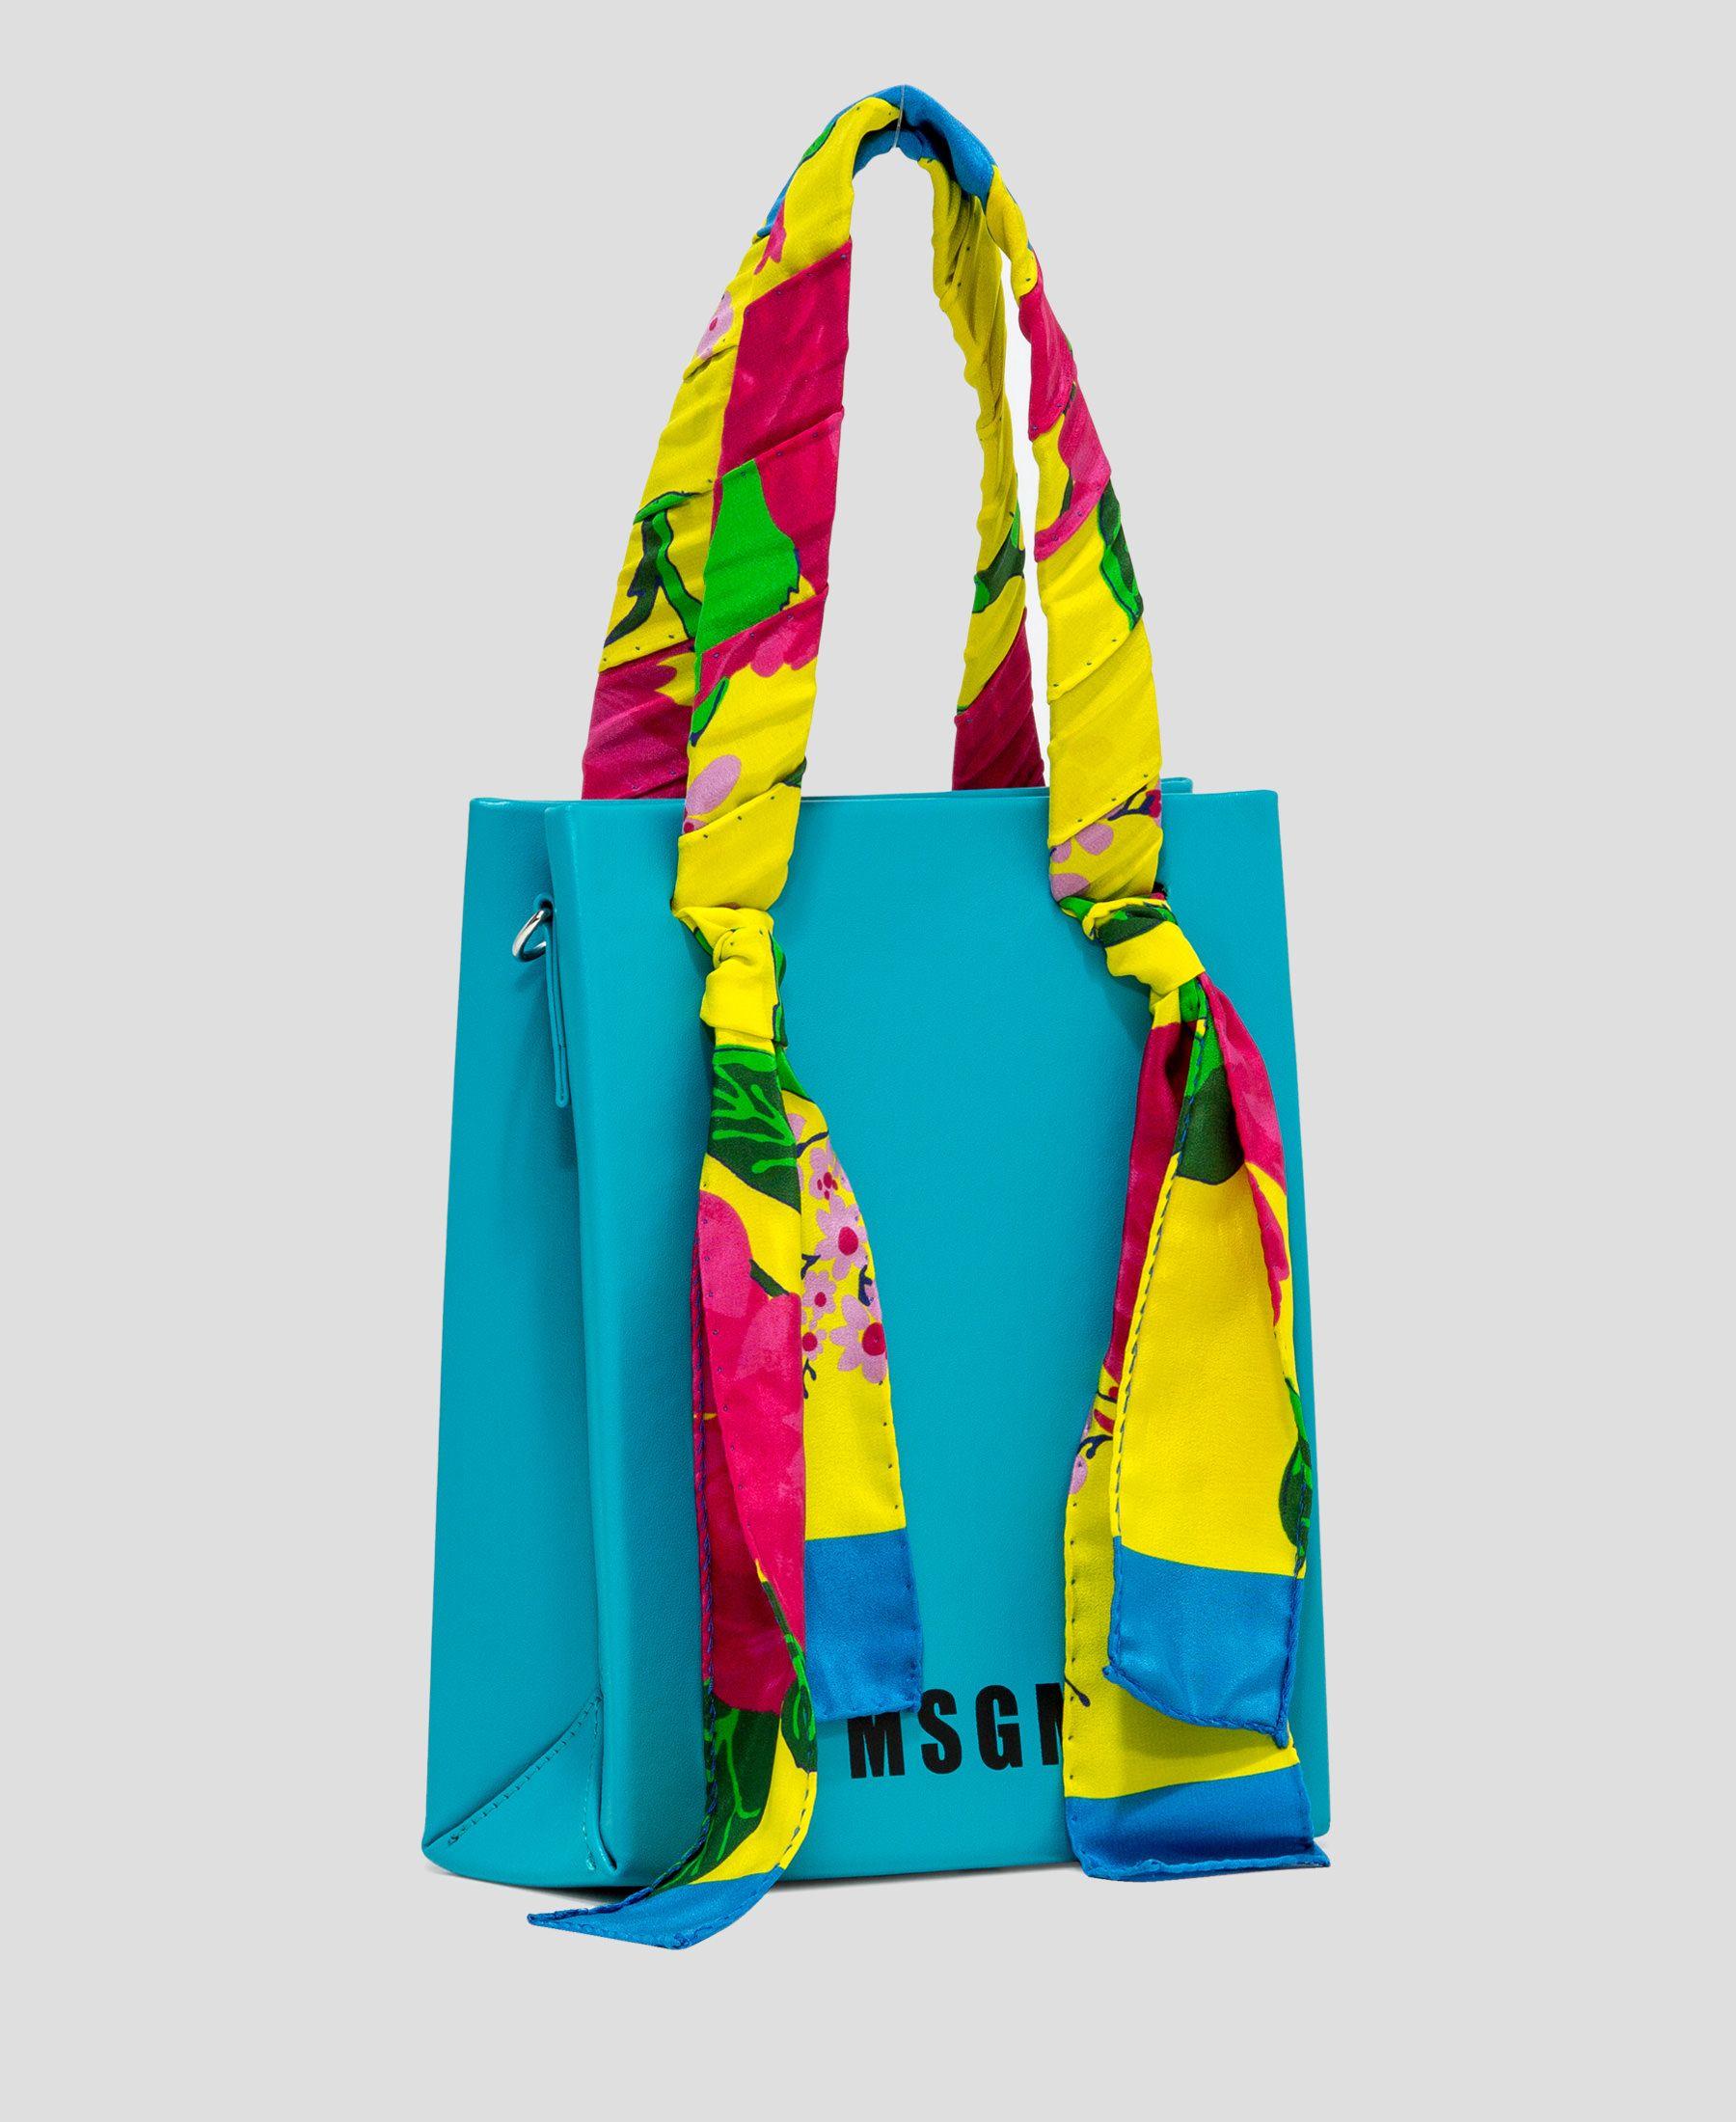 Micro Logo - MSGM LEATHER SHOPPER BAG WITH MICRO LOGO AND FOULARD DETAILING 2541MD